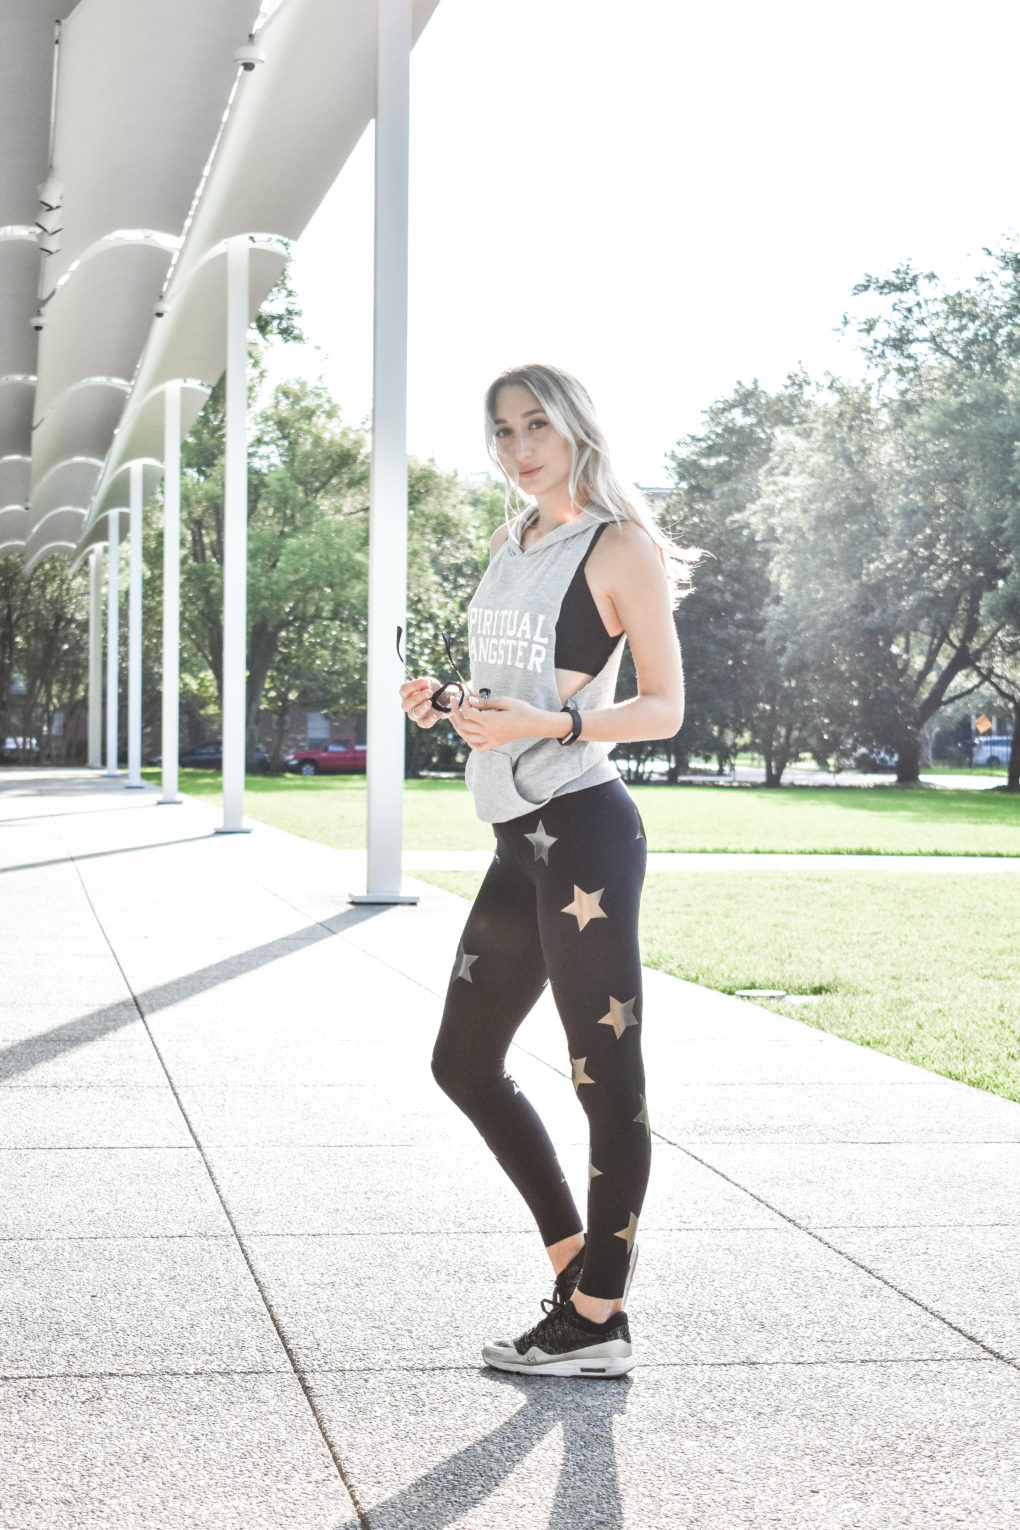 Stars and Tights, Workout Wear for The Summer